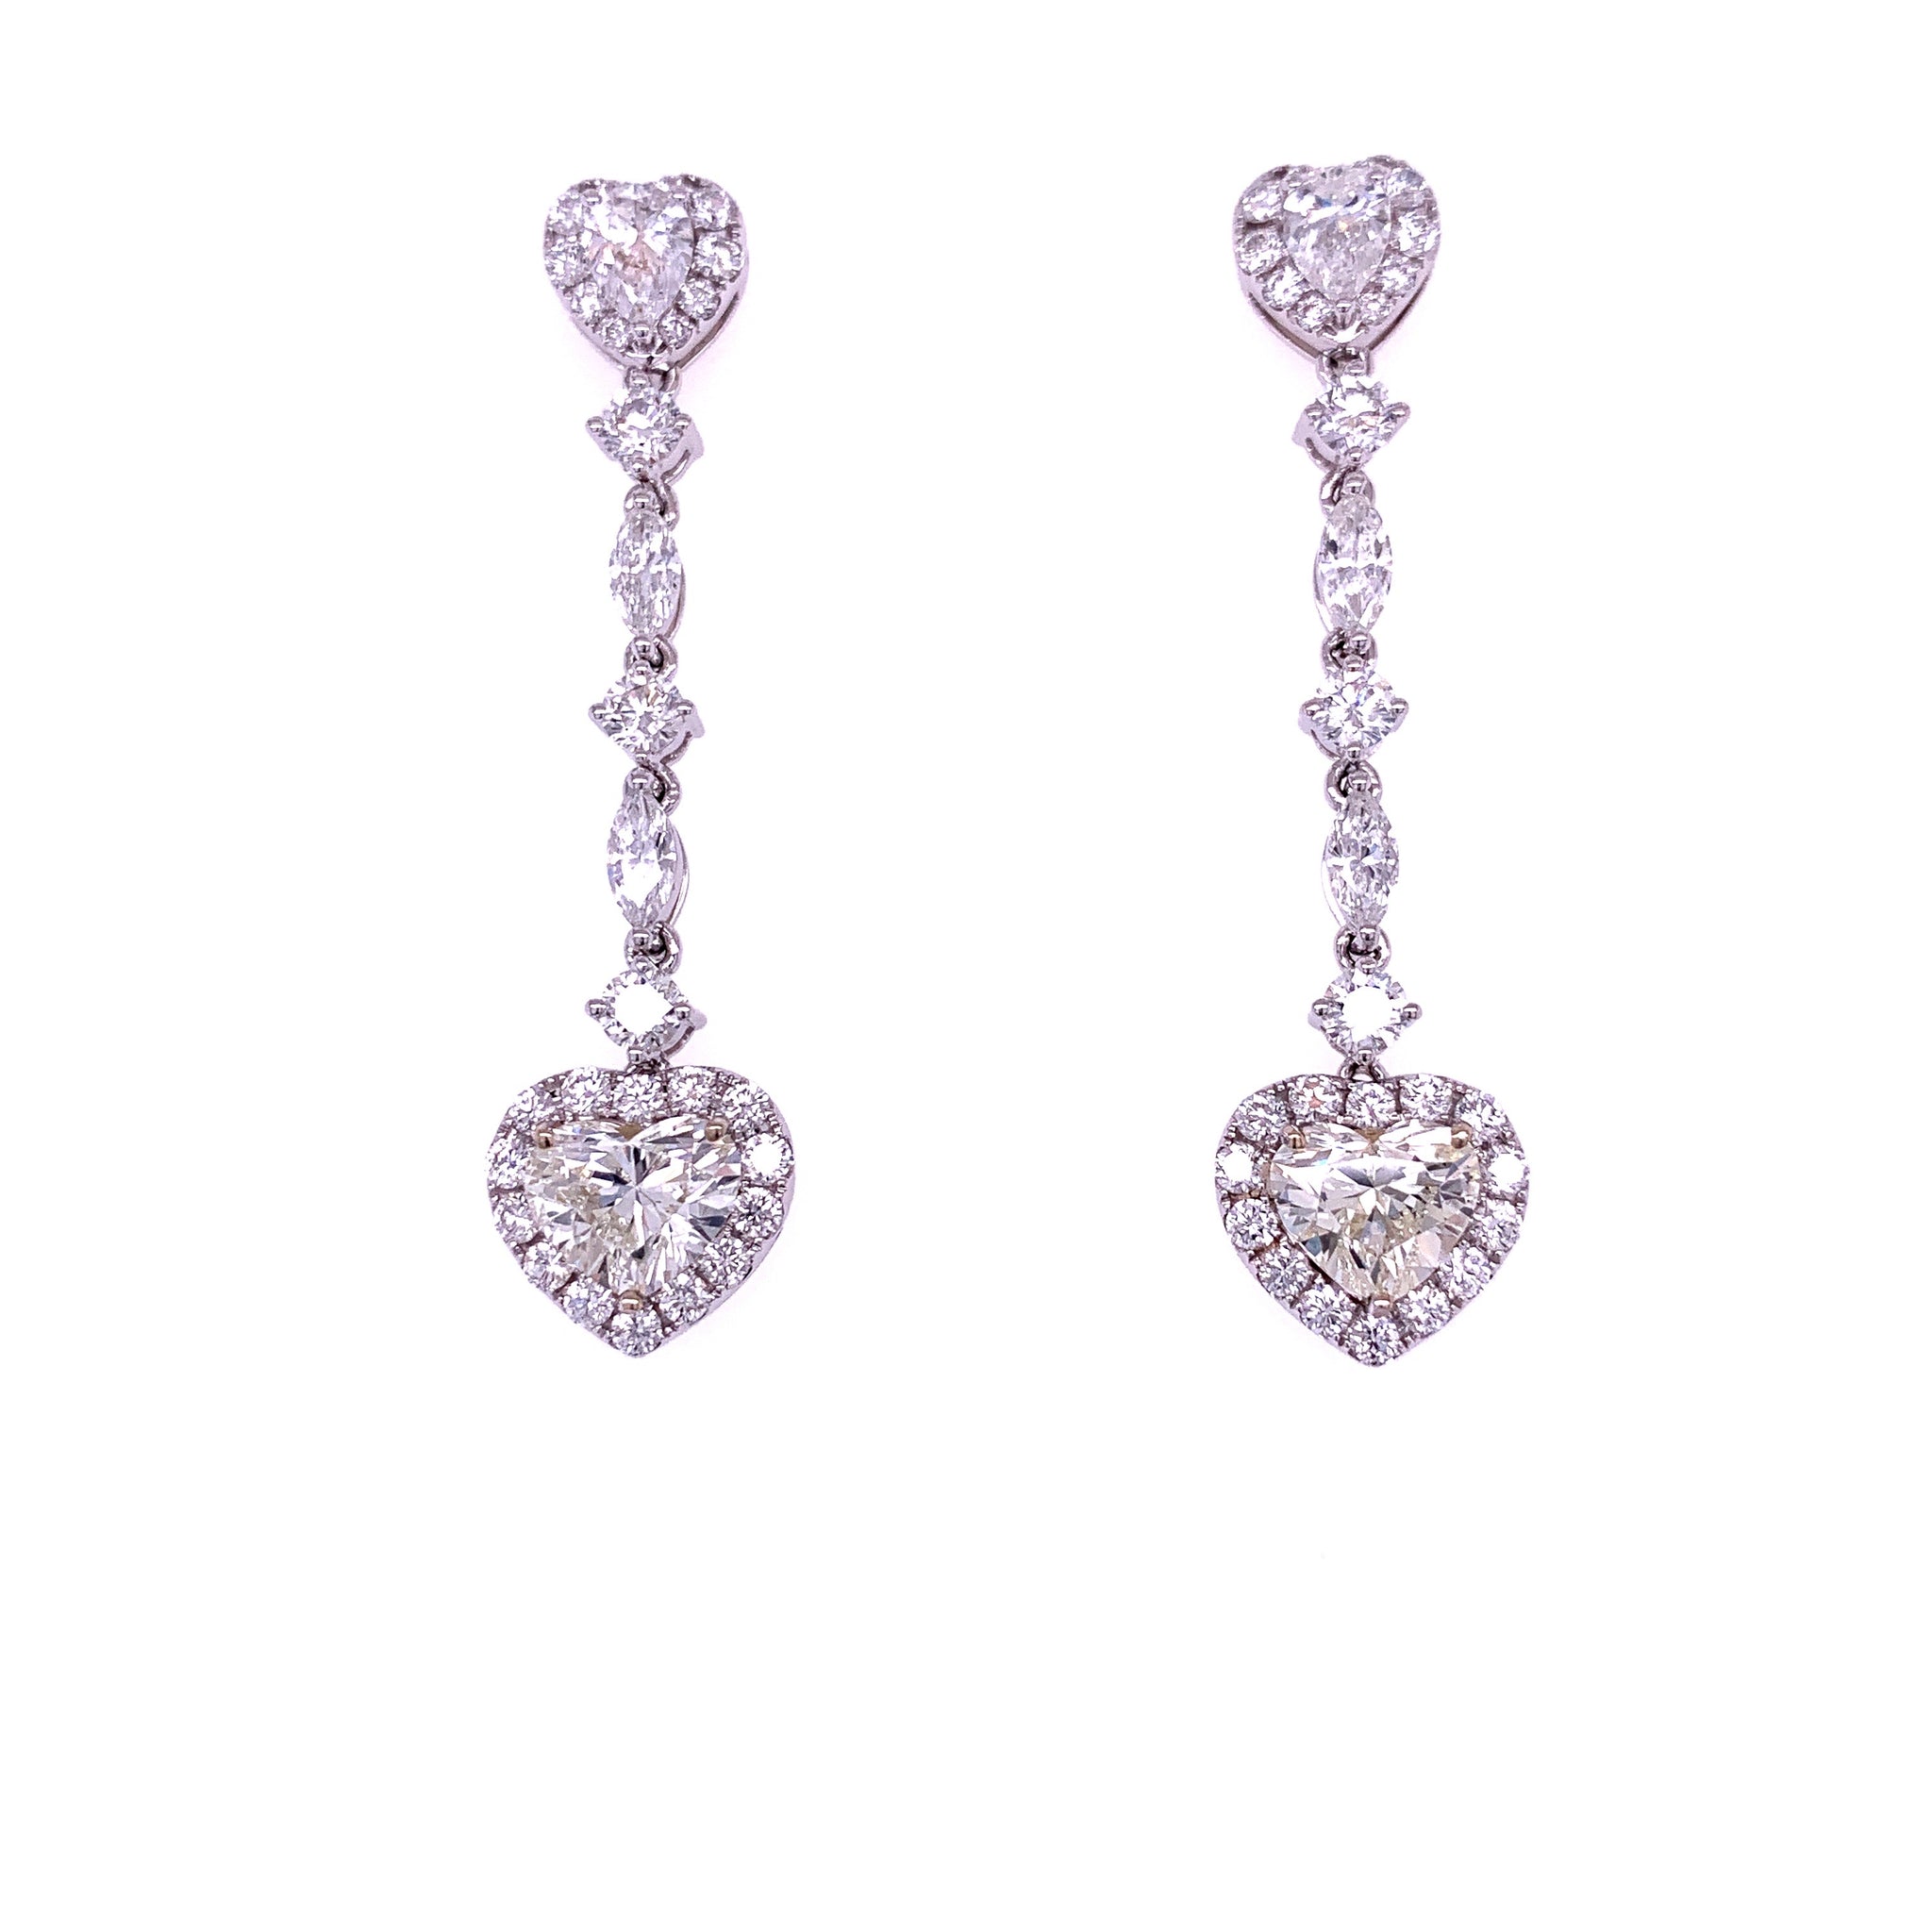 1/2 CT TW Heart and Round Diamonds Halo Stud Earrings in 14k White Gold -  CBG000618